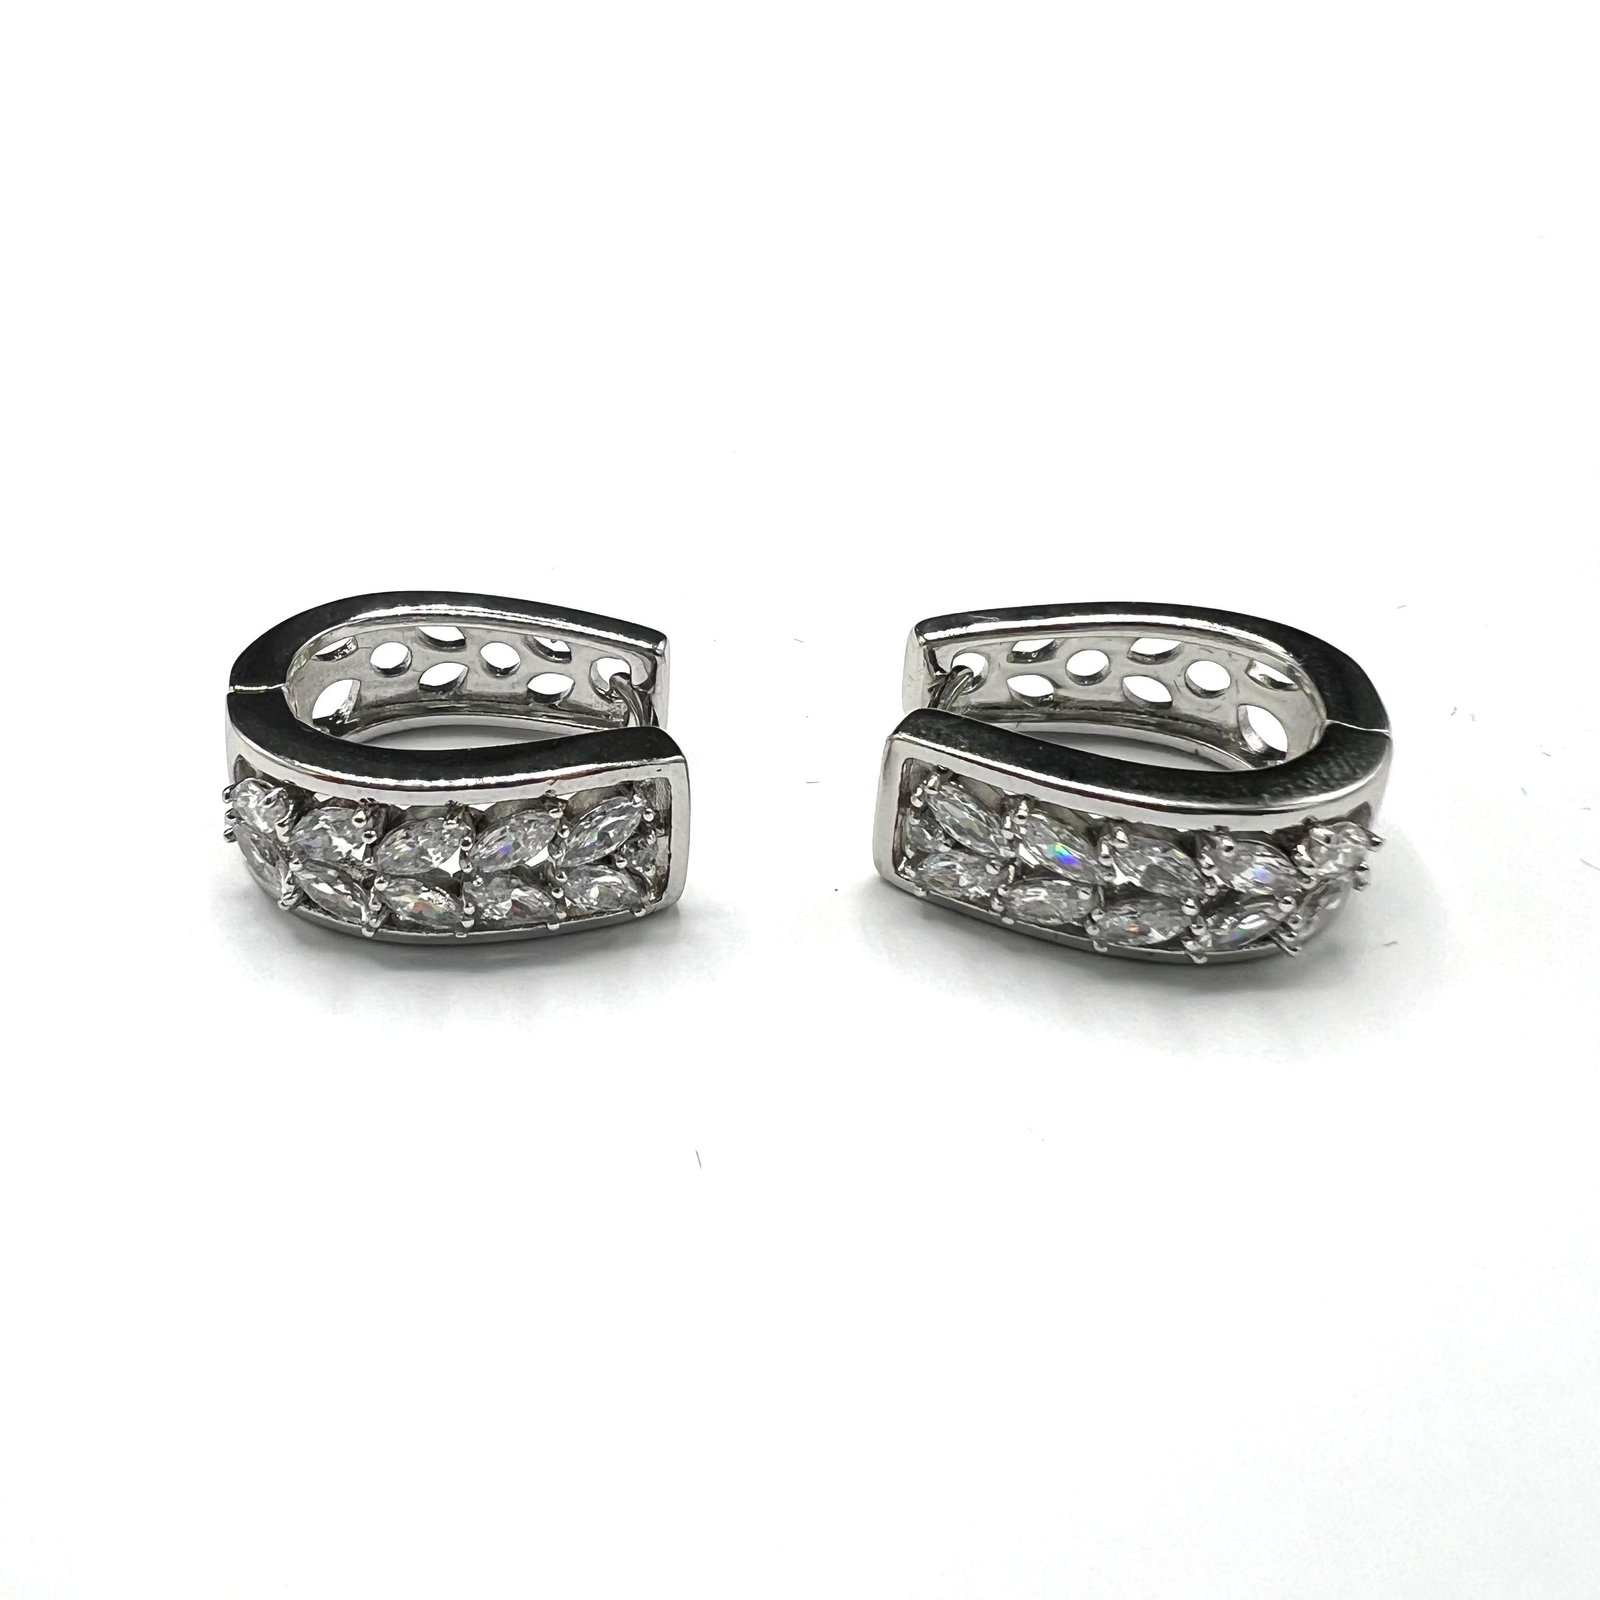 Premium Quality Silver Plated Earrings